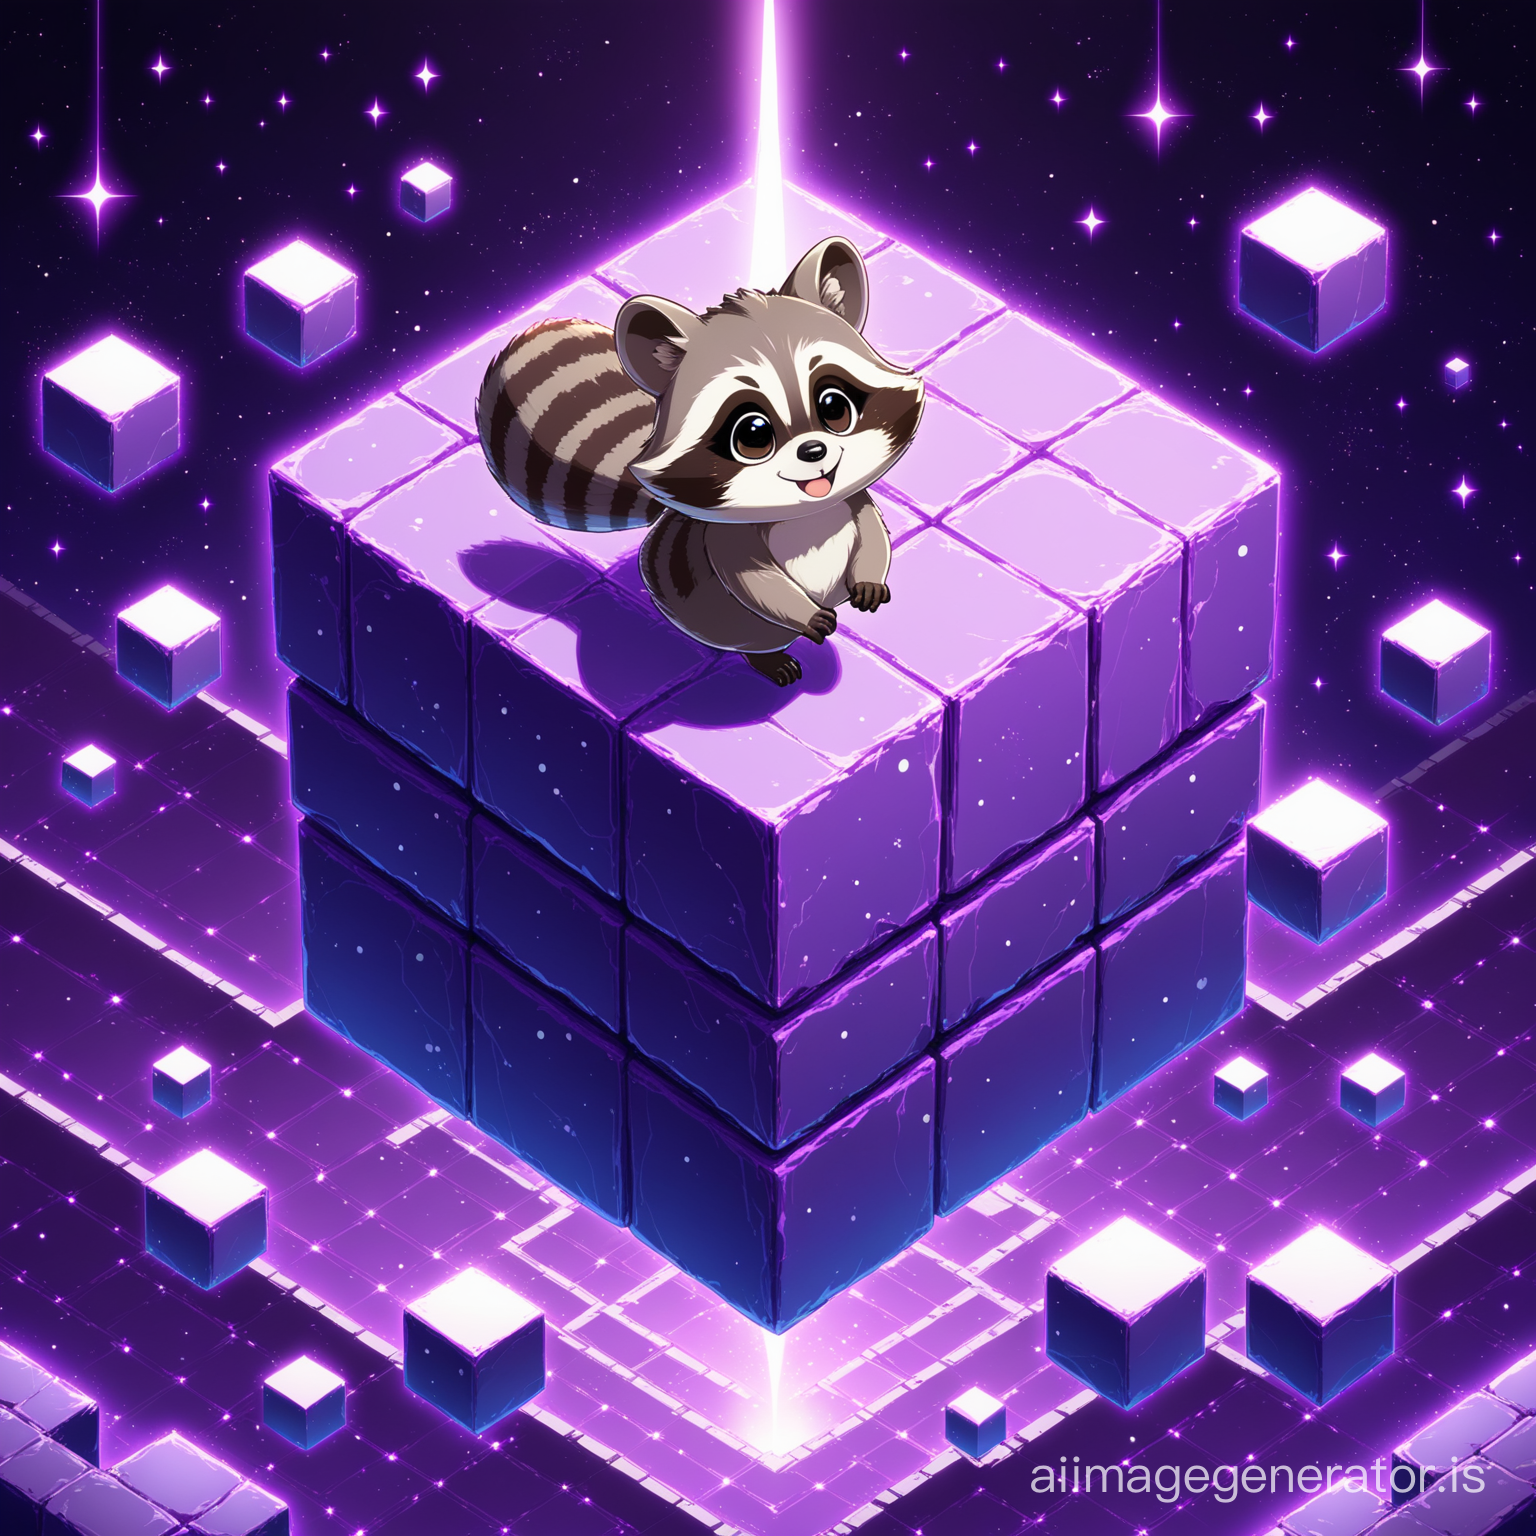 A little cute rocket raccon flying on the purple block earth with super detail and High Quality
big and Purple and floating blocks are seen everywhere
Details are evident beautifully and with great precision